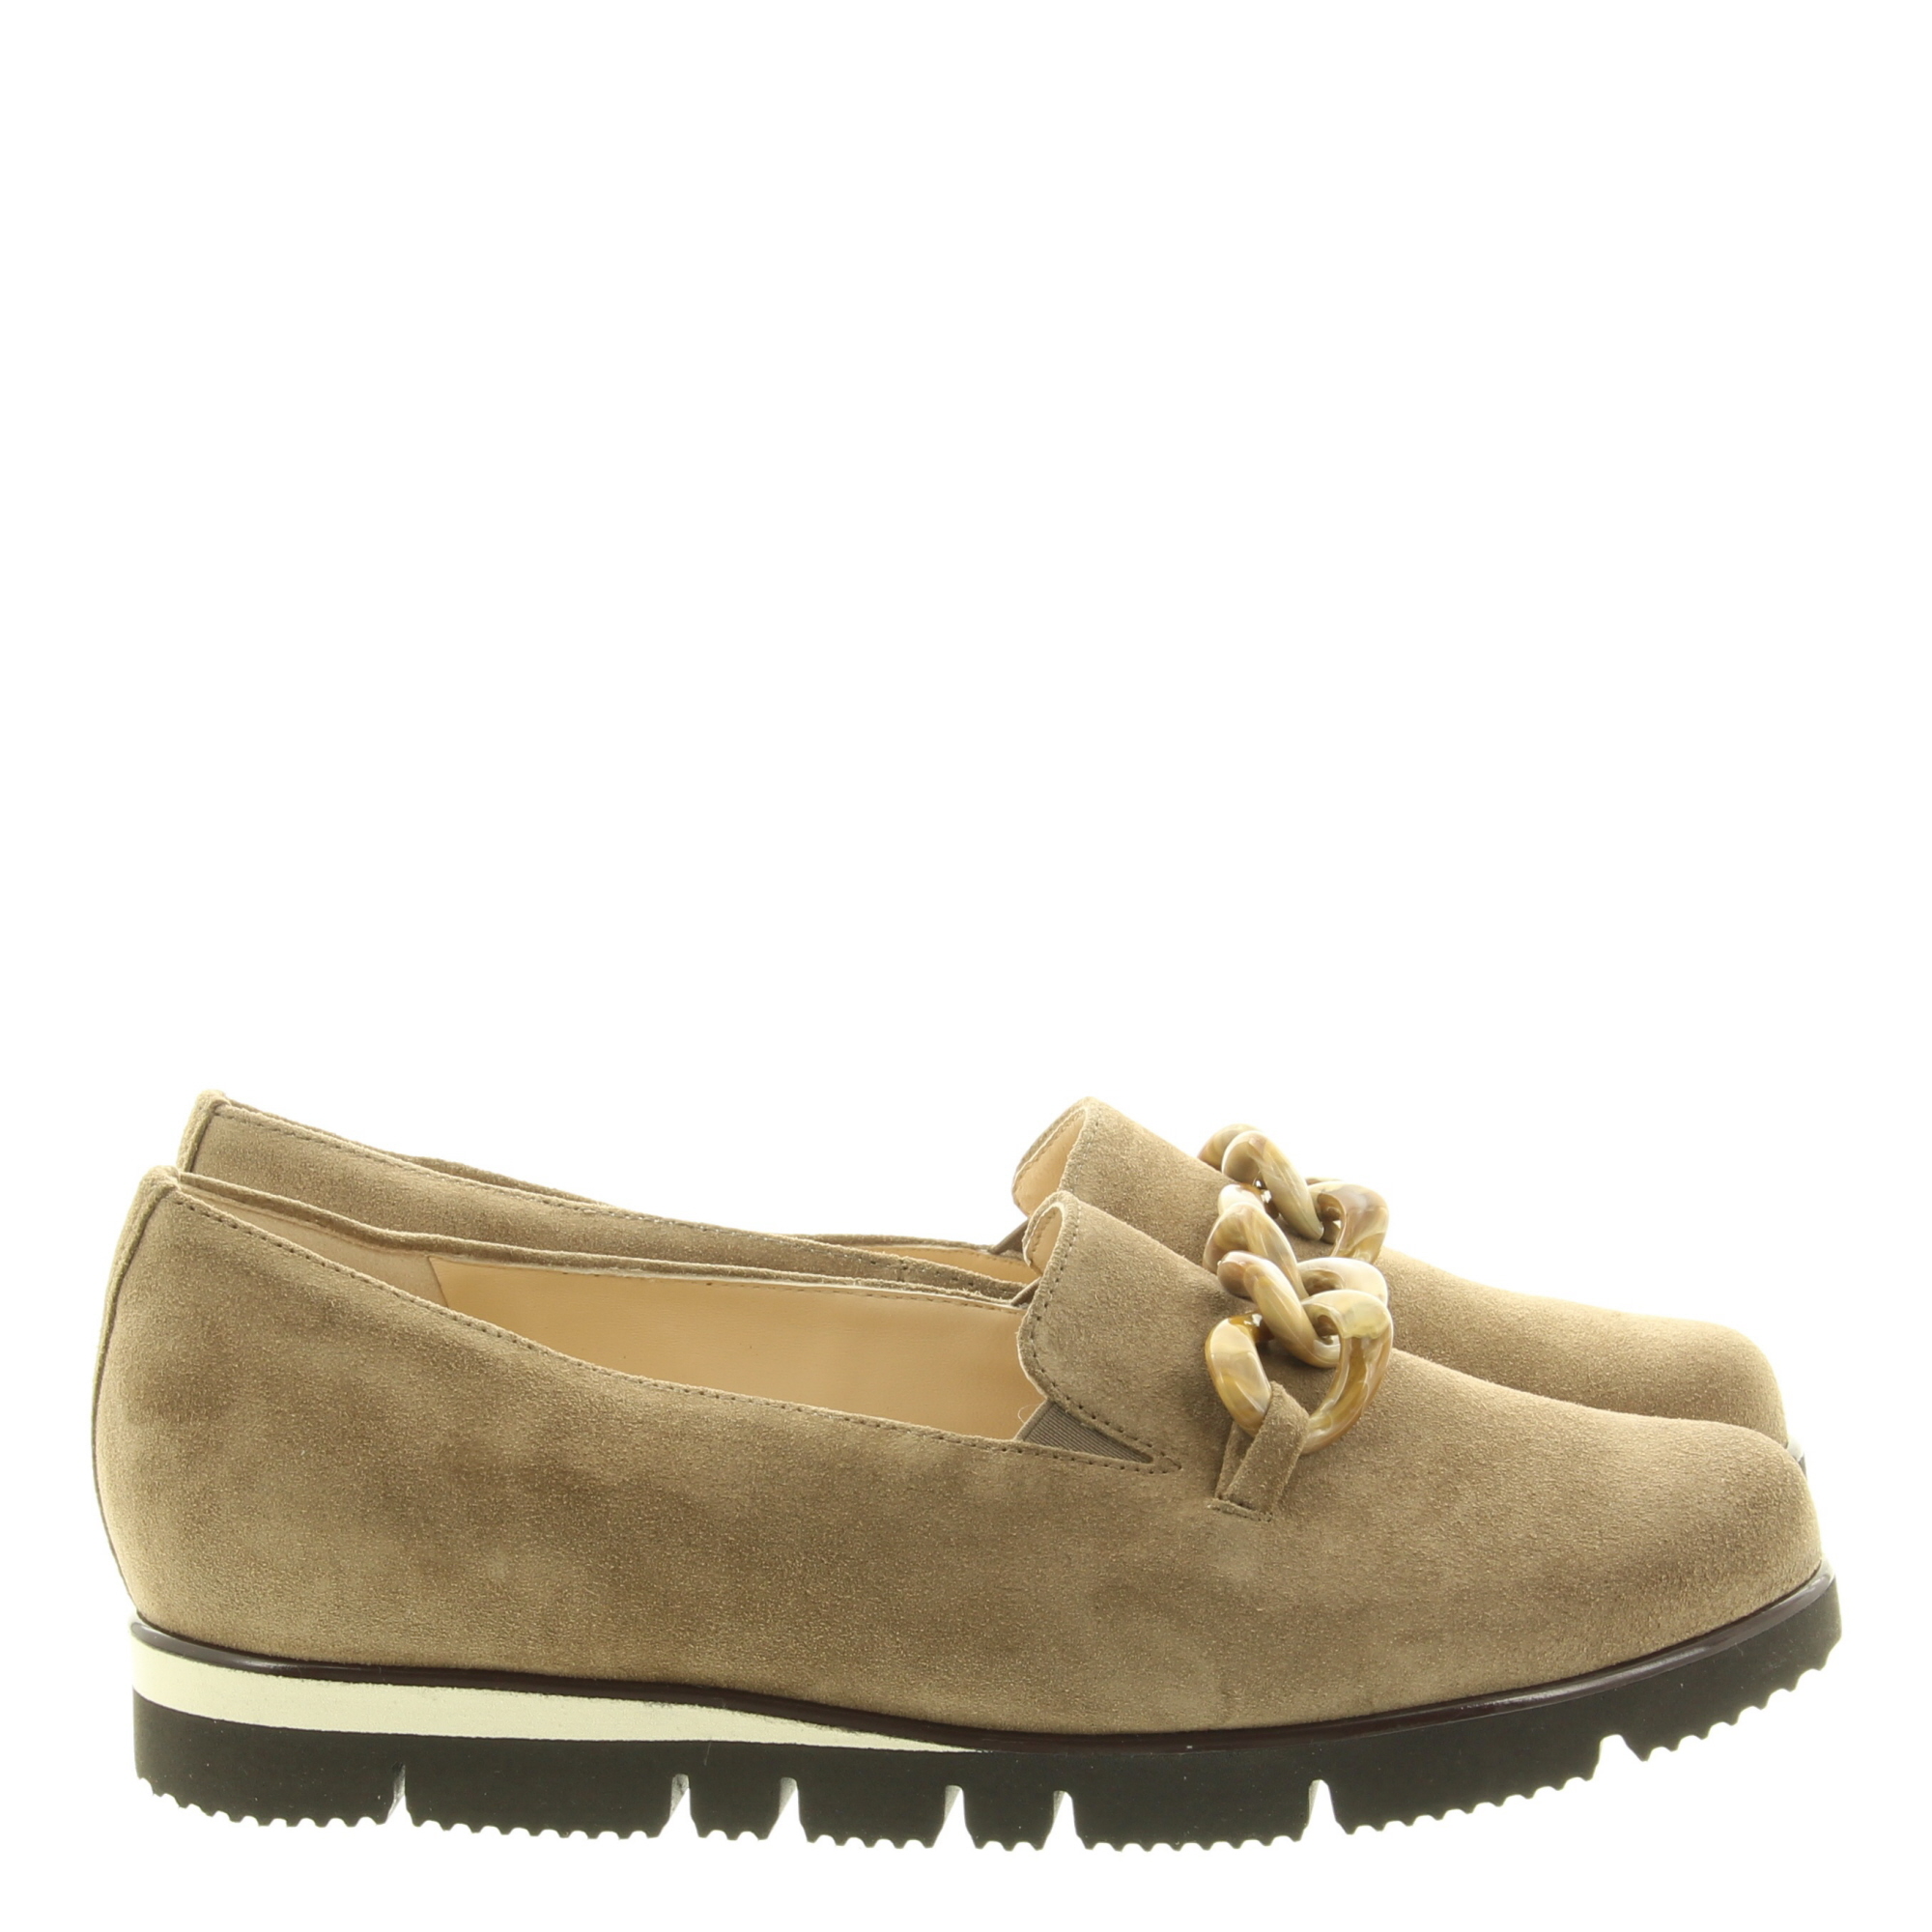 Hassia Shoes 301538 Pisa 1900 Taupe